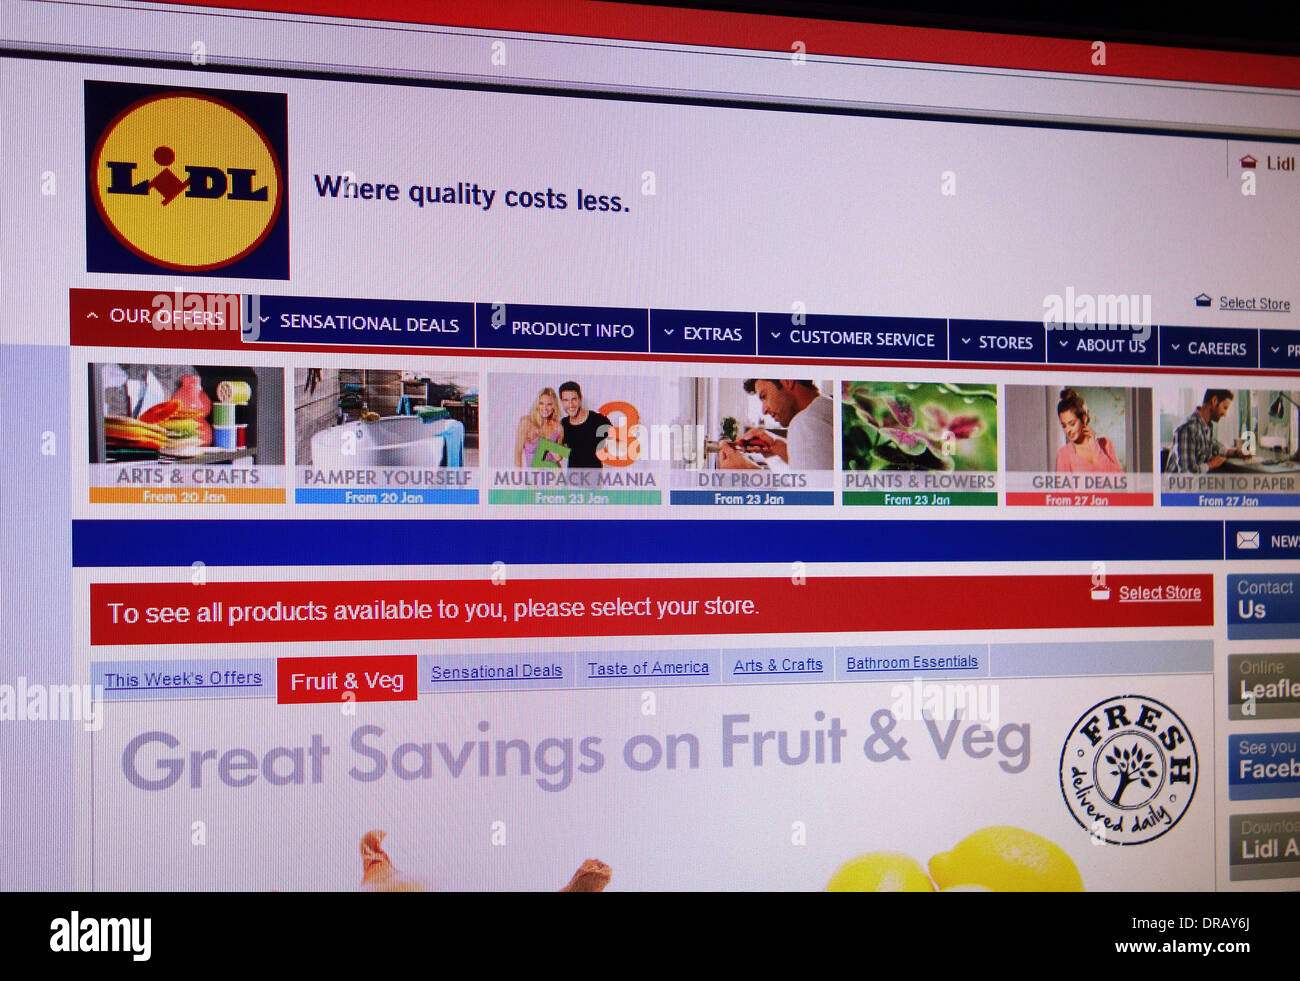 lidl online shopping web site Stock Photo - Alamy